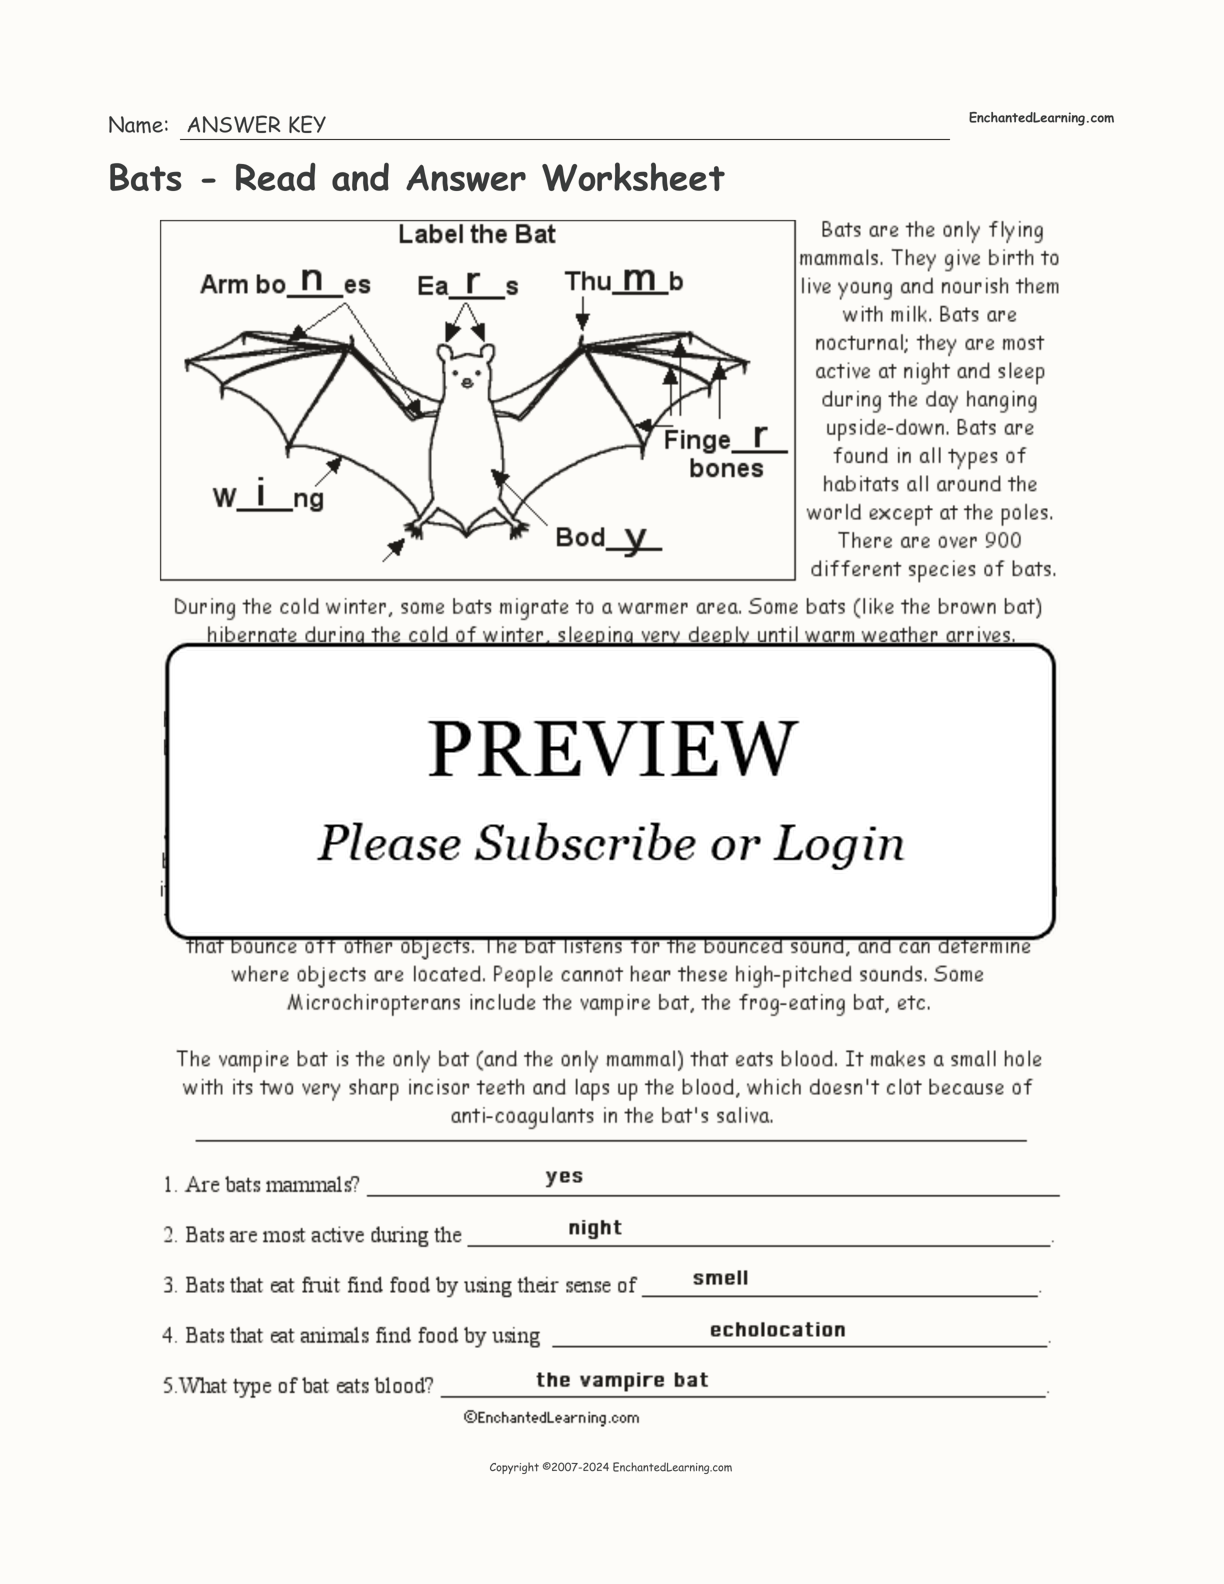 Bats - Read and Answer Worksheet - Enchanted Learning